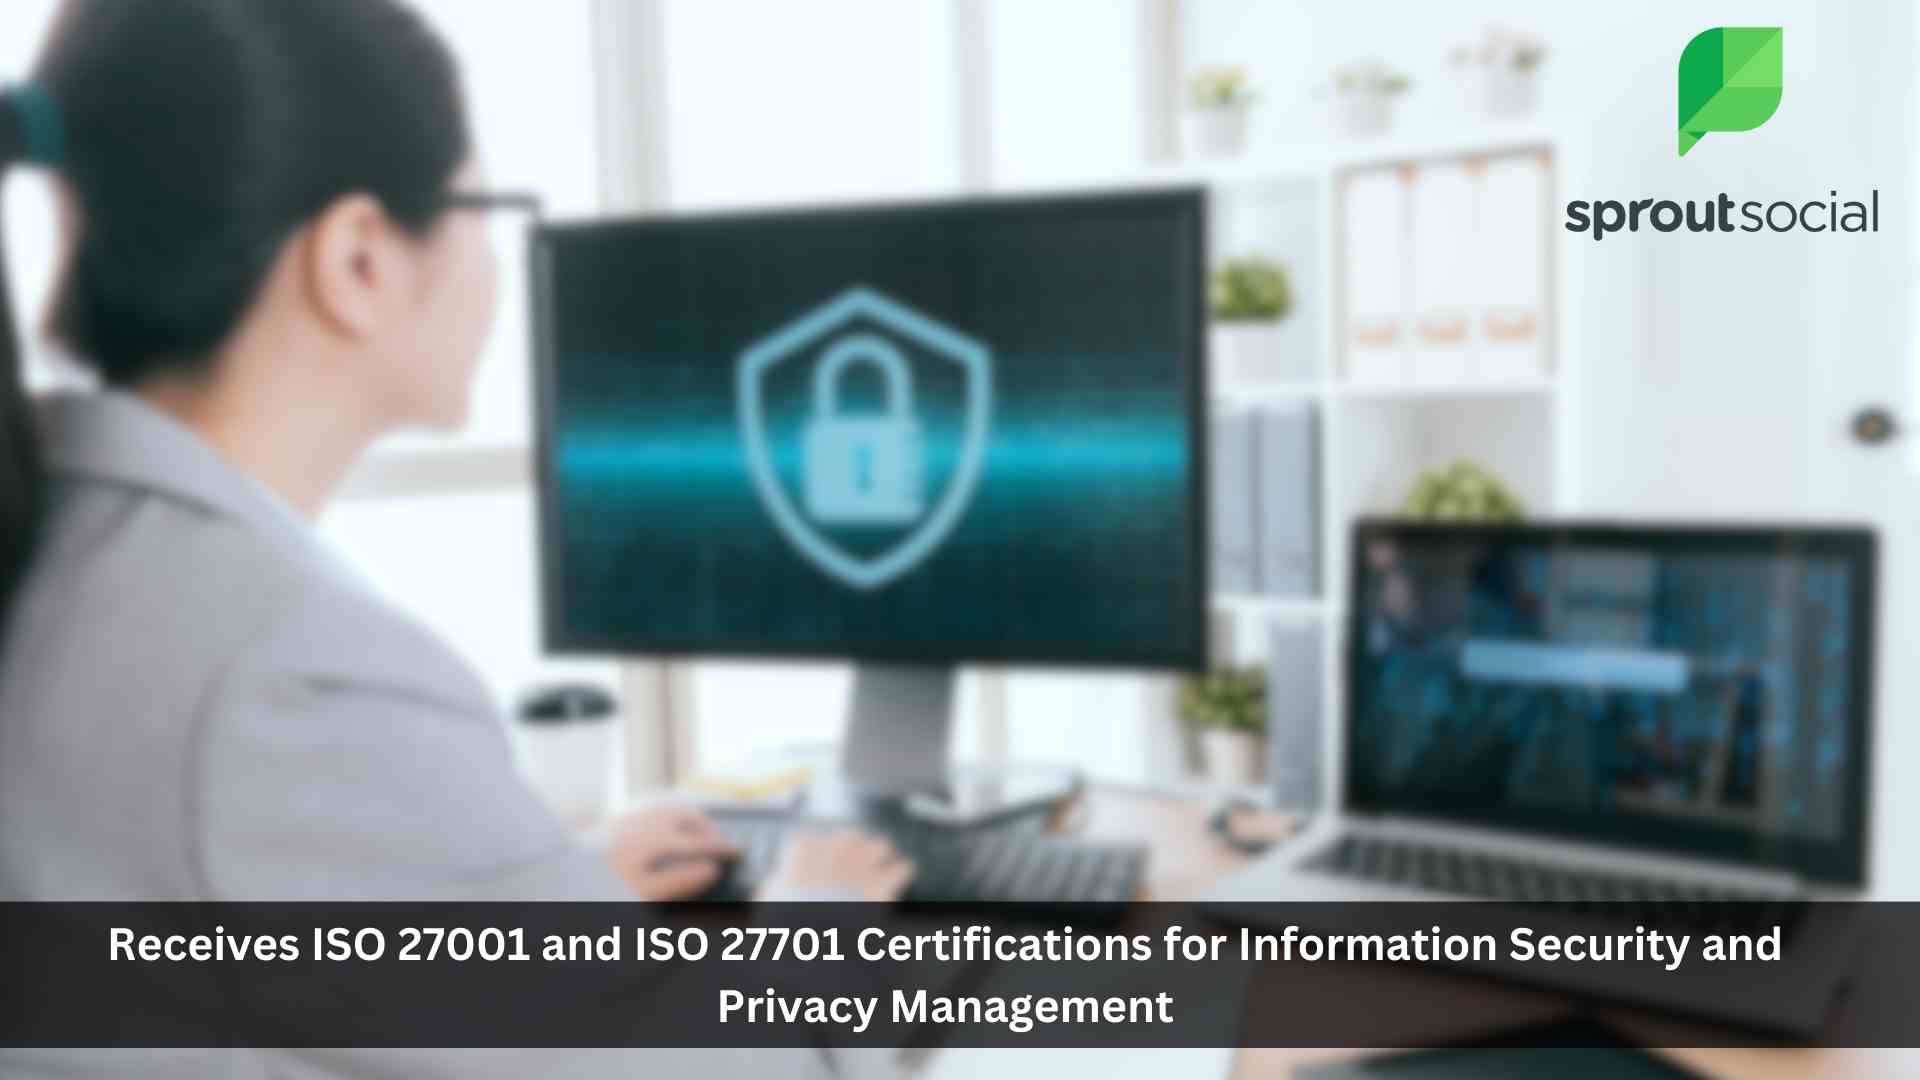 Sprout Social Receives ISO 27001 and ISO 27701 Certifications for Information Security and Privacy Management